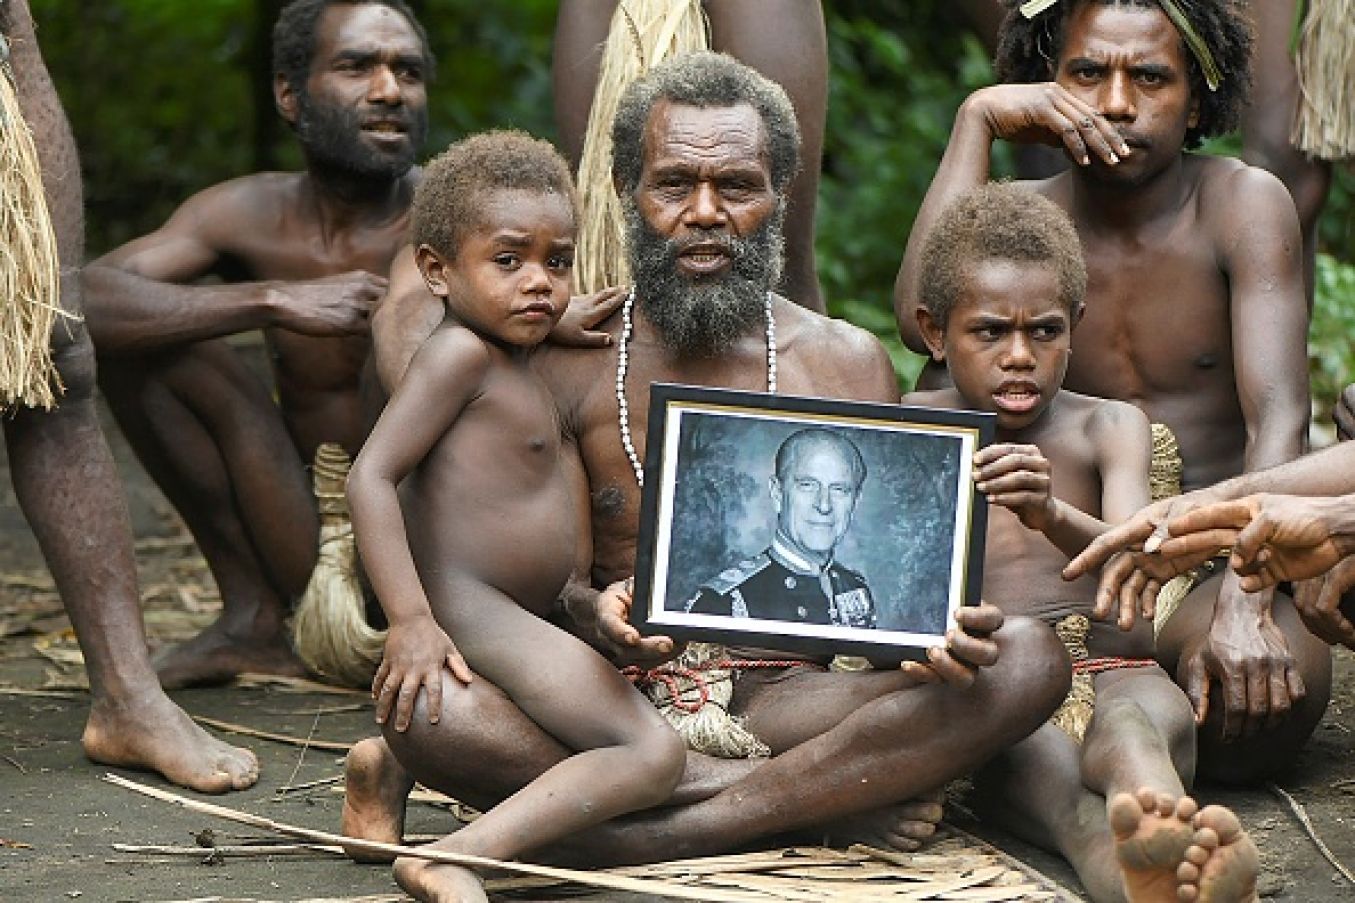 Yakel Village Chief Albi, And Members Of His Family, Holds A Portrait Of Britain's Prince Philip, Duke Of Edinburgh, In The Remote Pacific Village Of Vanuatu. They Worshipped Prince Philip As A Living God. Photo: Dan Mcgarry / Afp Via Getty Images